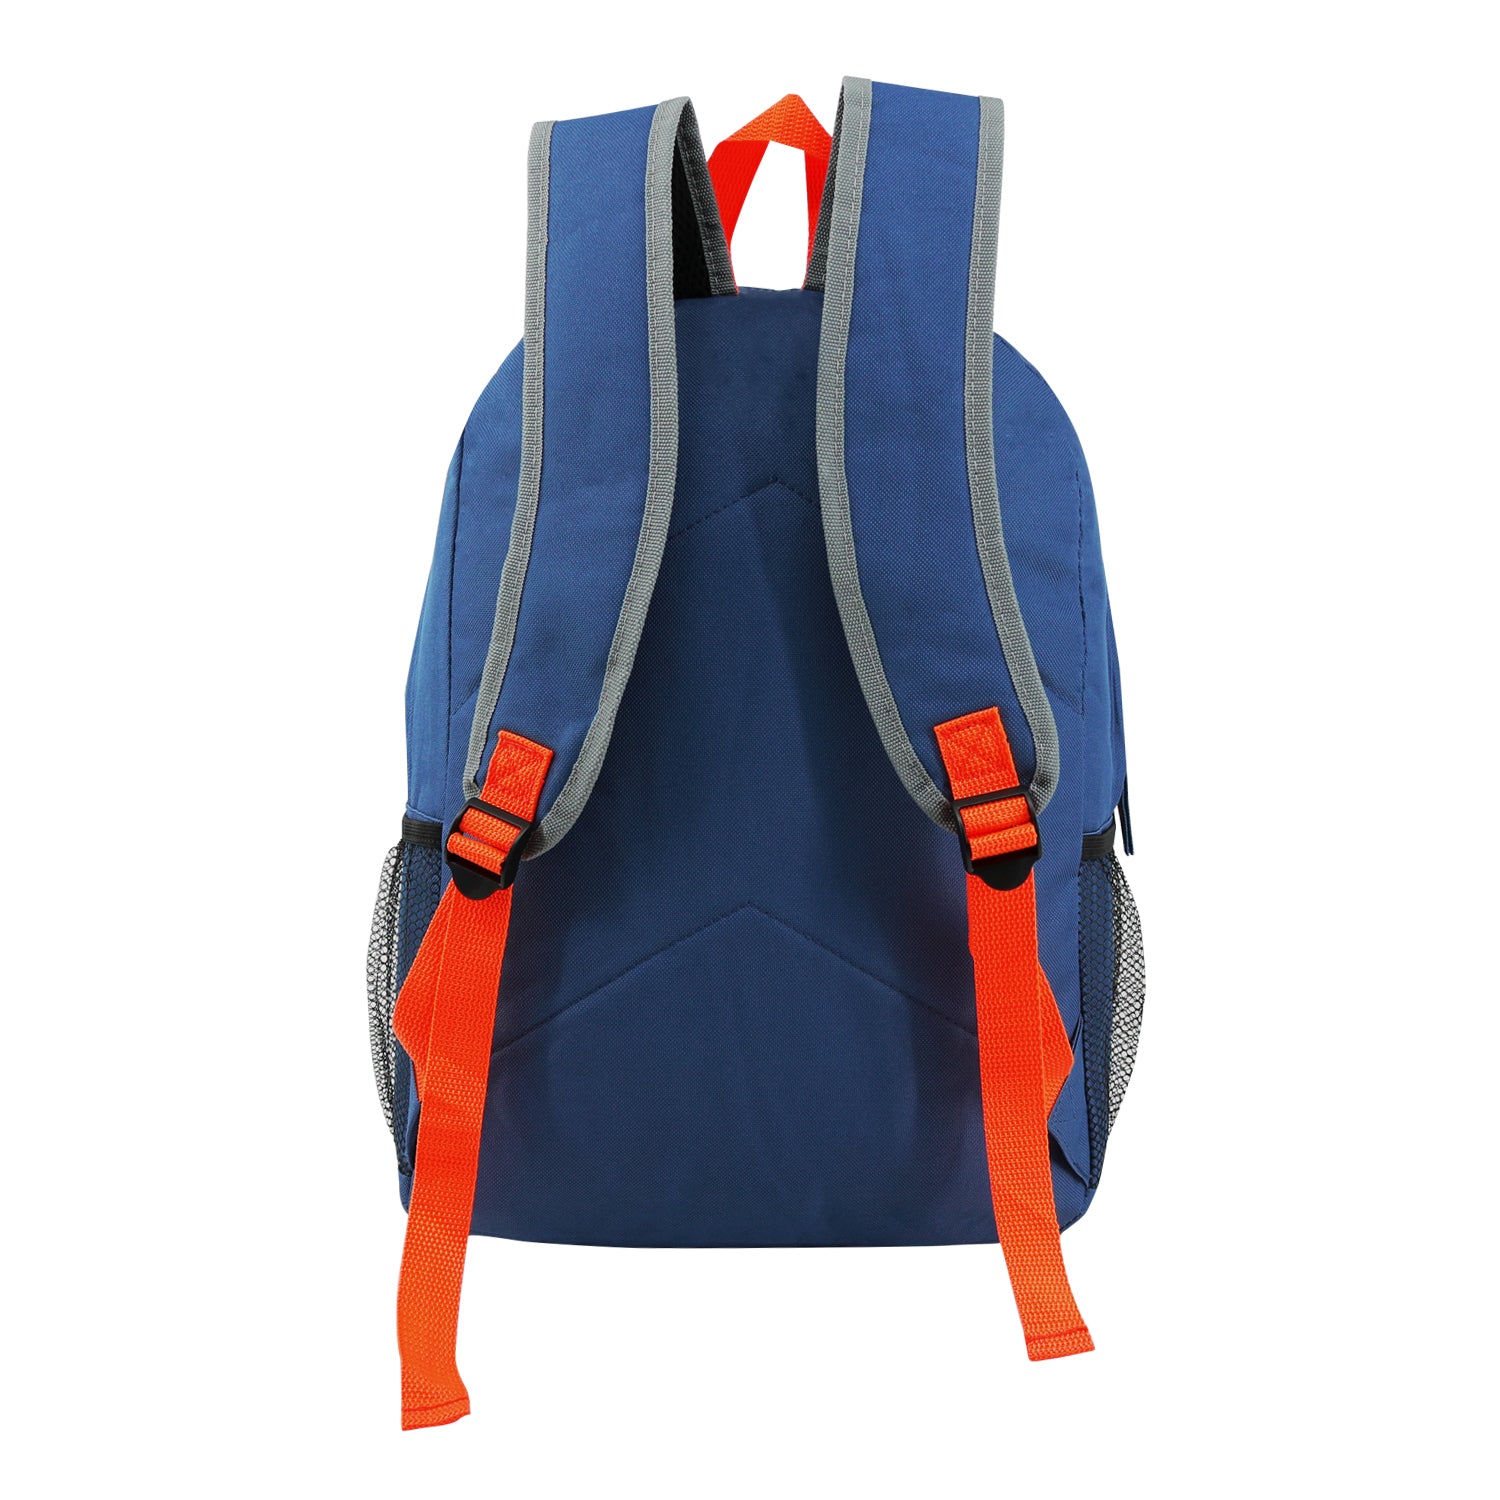 17" Bungee Wholesale Premium Design Backpacks in 4 Assorted Colors - Wholesale Bookbags Case of 24